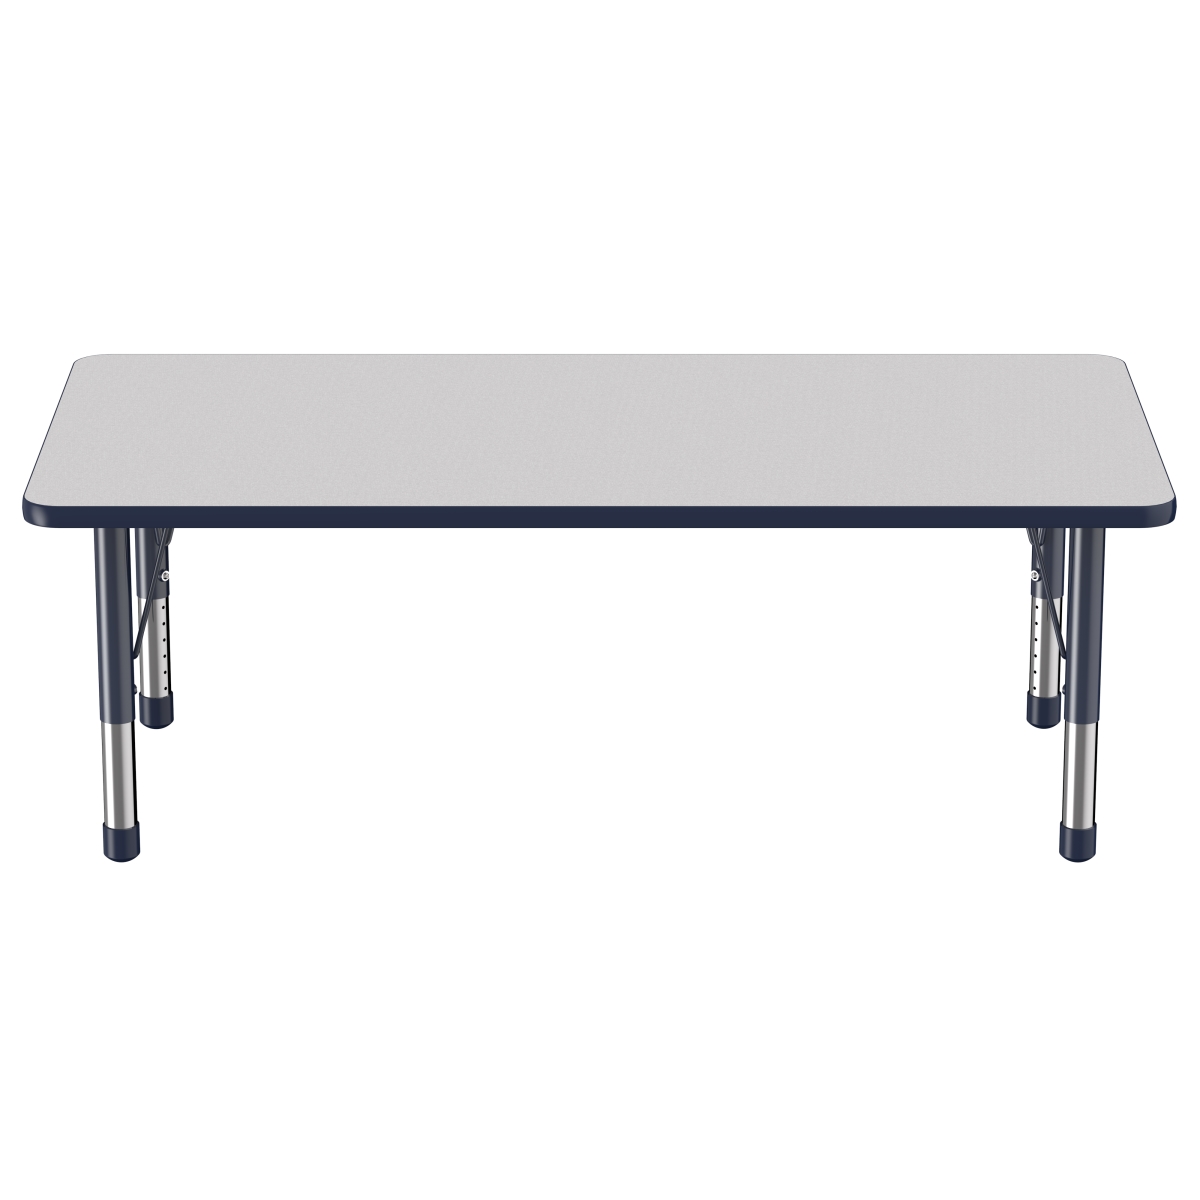 10025-gynv 30 X 60 In. Rectangle T-mold Adjustable Activity Table With Chunky Leg - Grey & Navy